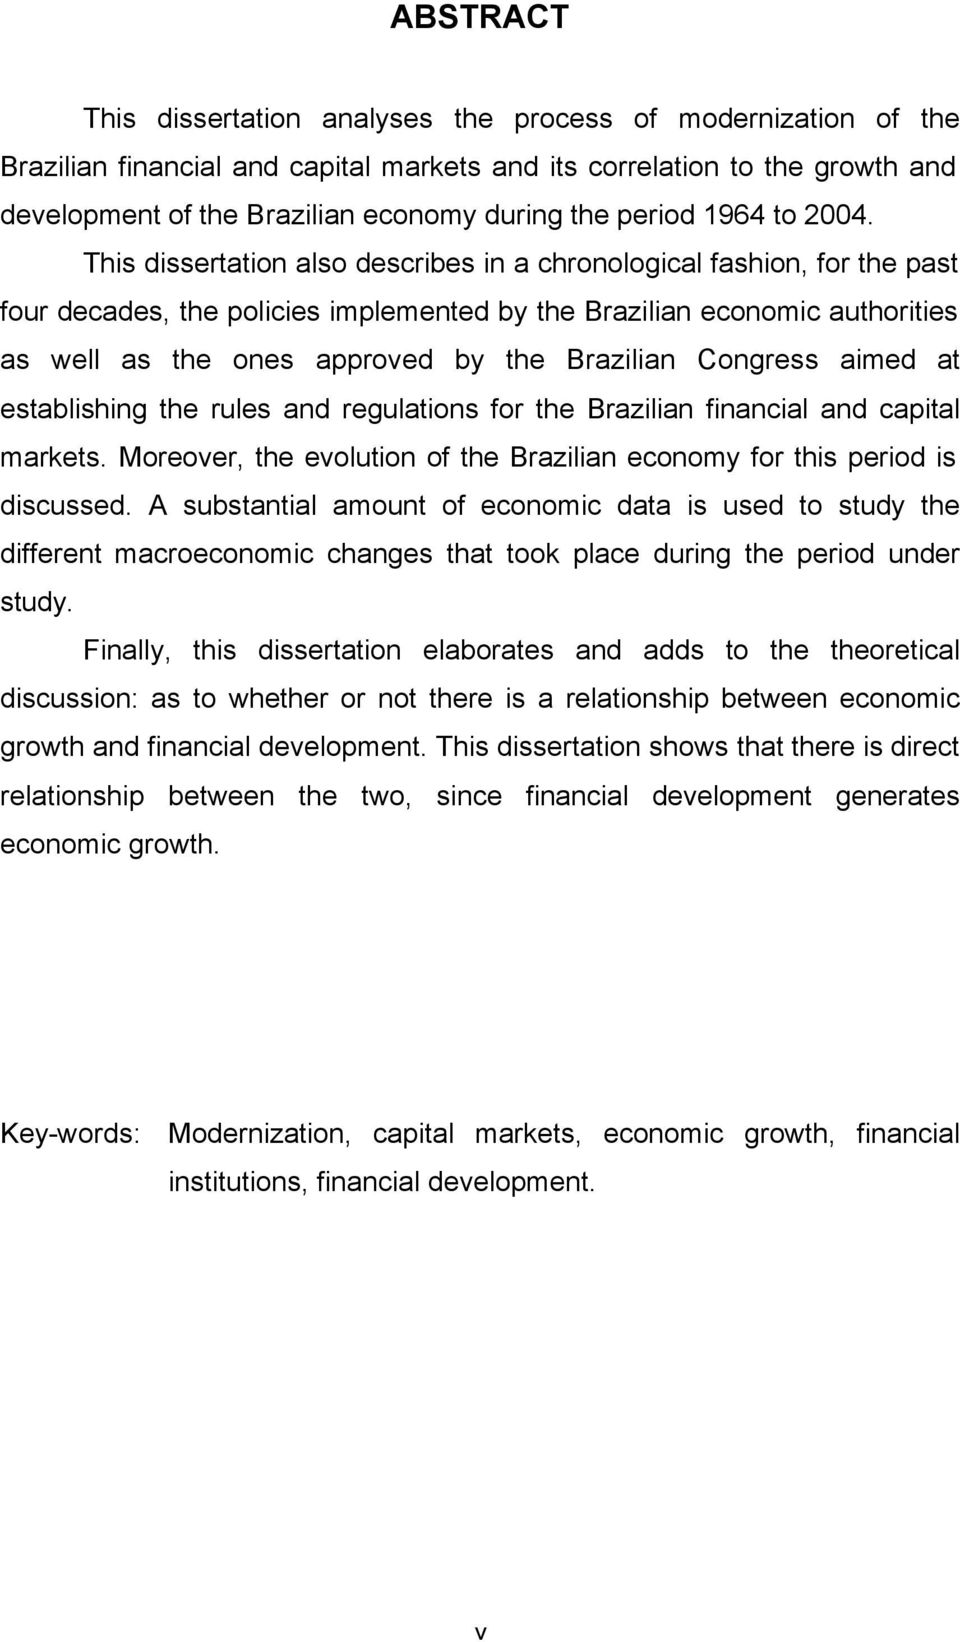 This dissertation also describes in a chronological fashion, for the past four decades, the policies implemented by the Brazilian economic authorities as well as the ones approved by the Brazilian